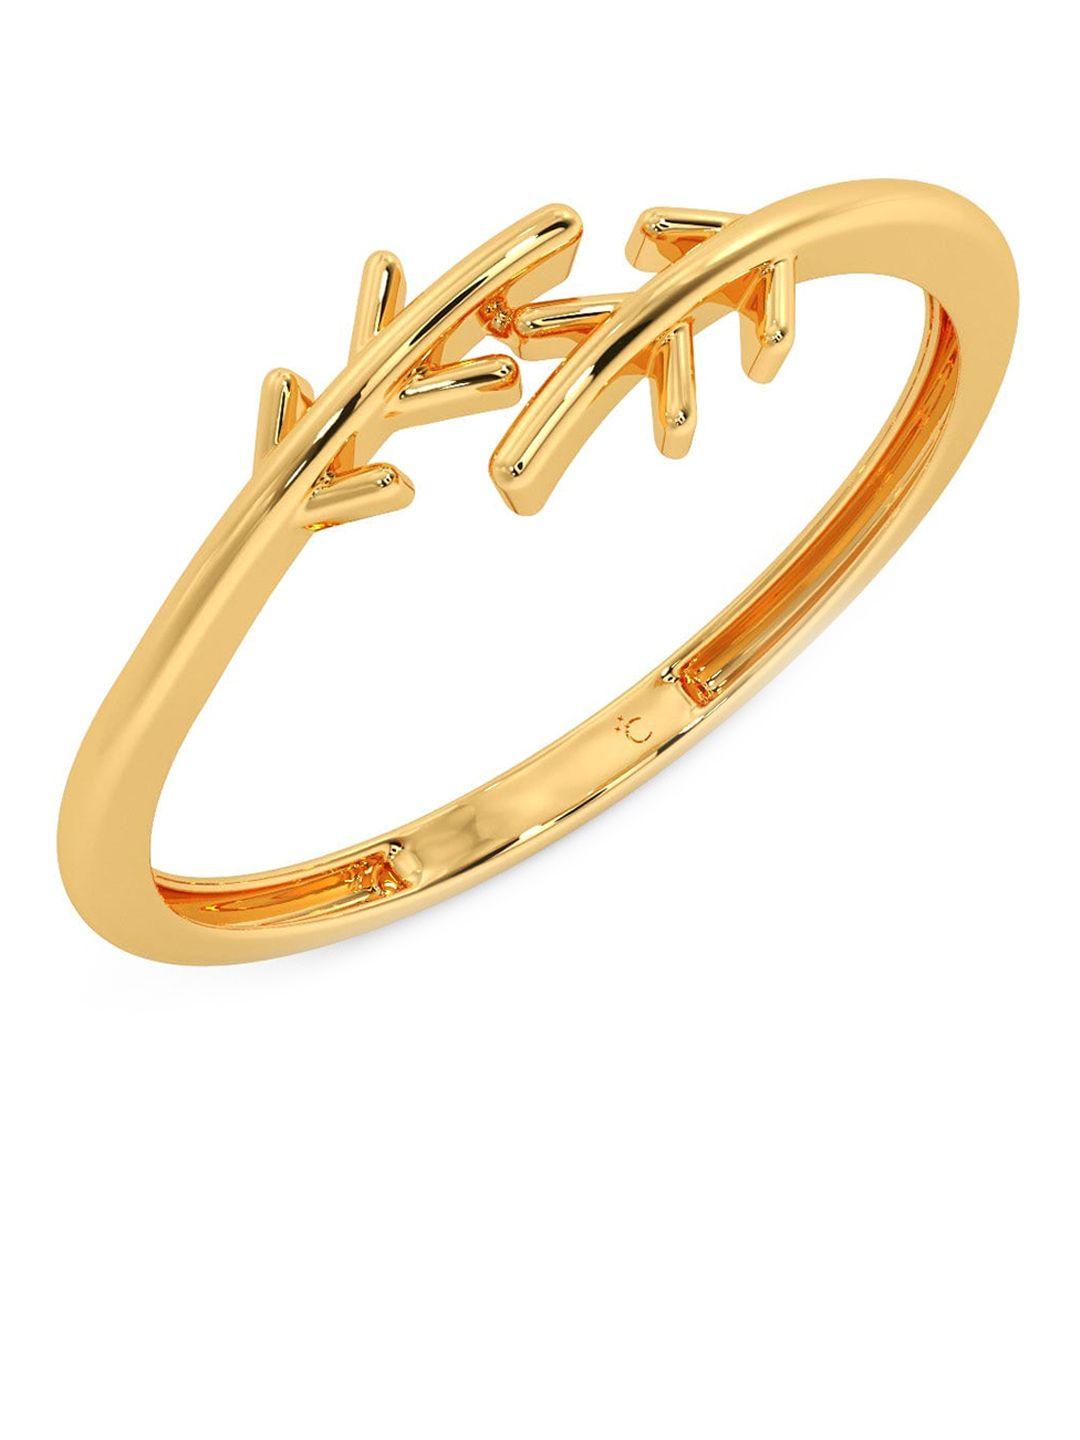 CANDERE A KALYAN JEWELLERS COMPANY 18KT Gold Ring-0.83gm